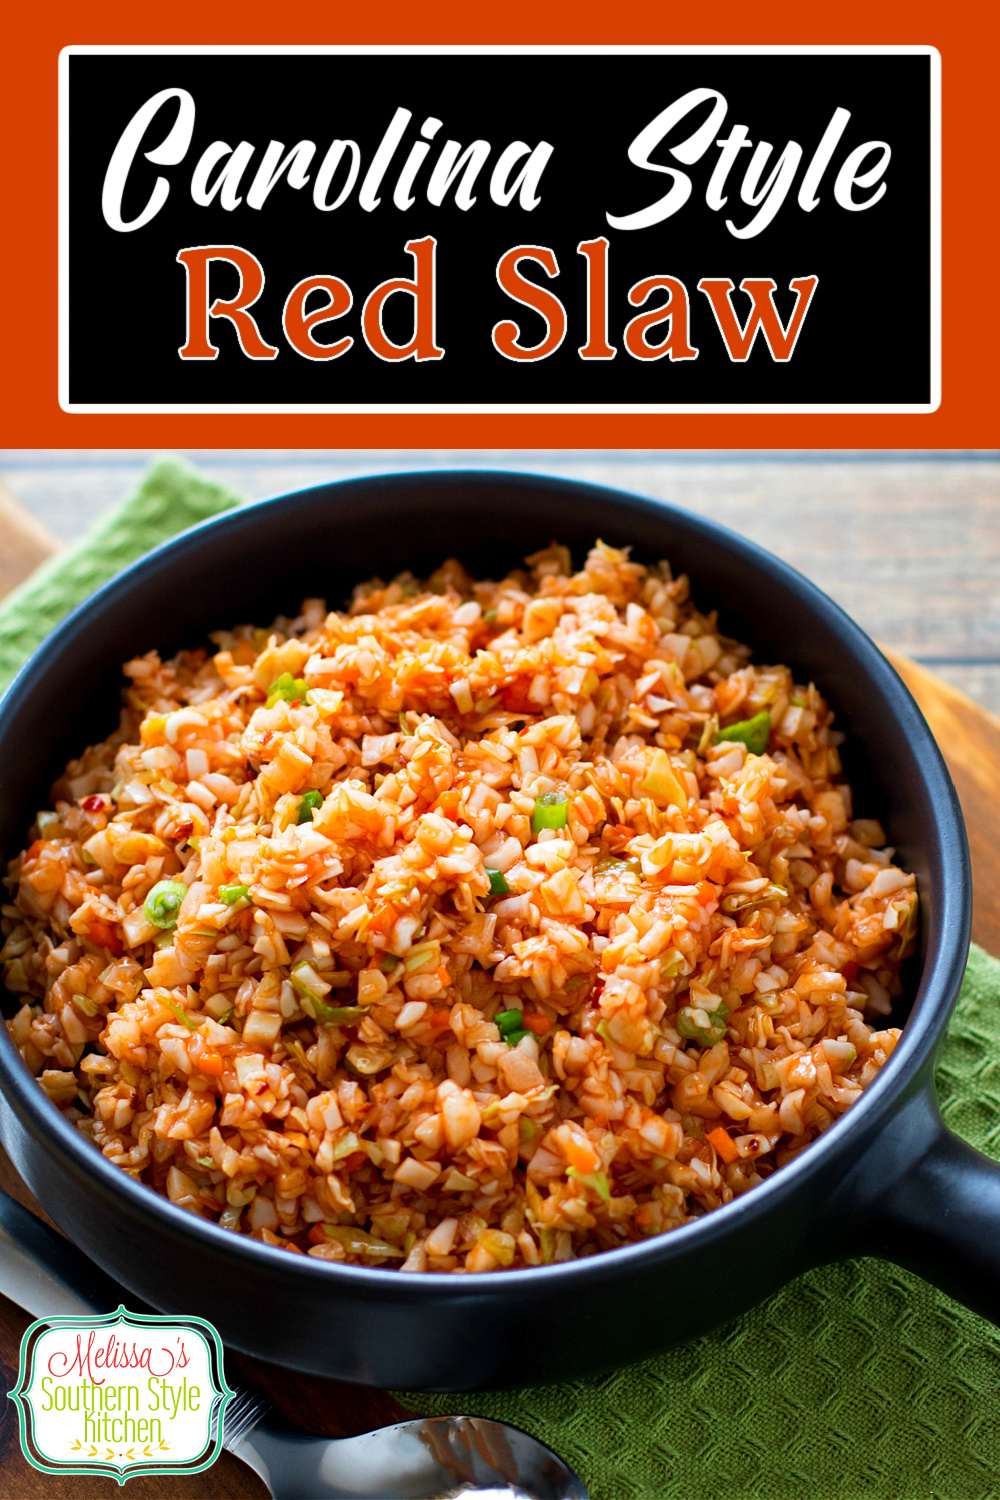 Sweet and tangy Carolina Style Red Slaw is ideal for serving with pork barbecue #barbecueslaw #carolinaredslaw #easternnorthcarolinaslaw #coleslawrecipes #porkbarbecue #sidedish #southernfood #southernrecipes